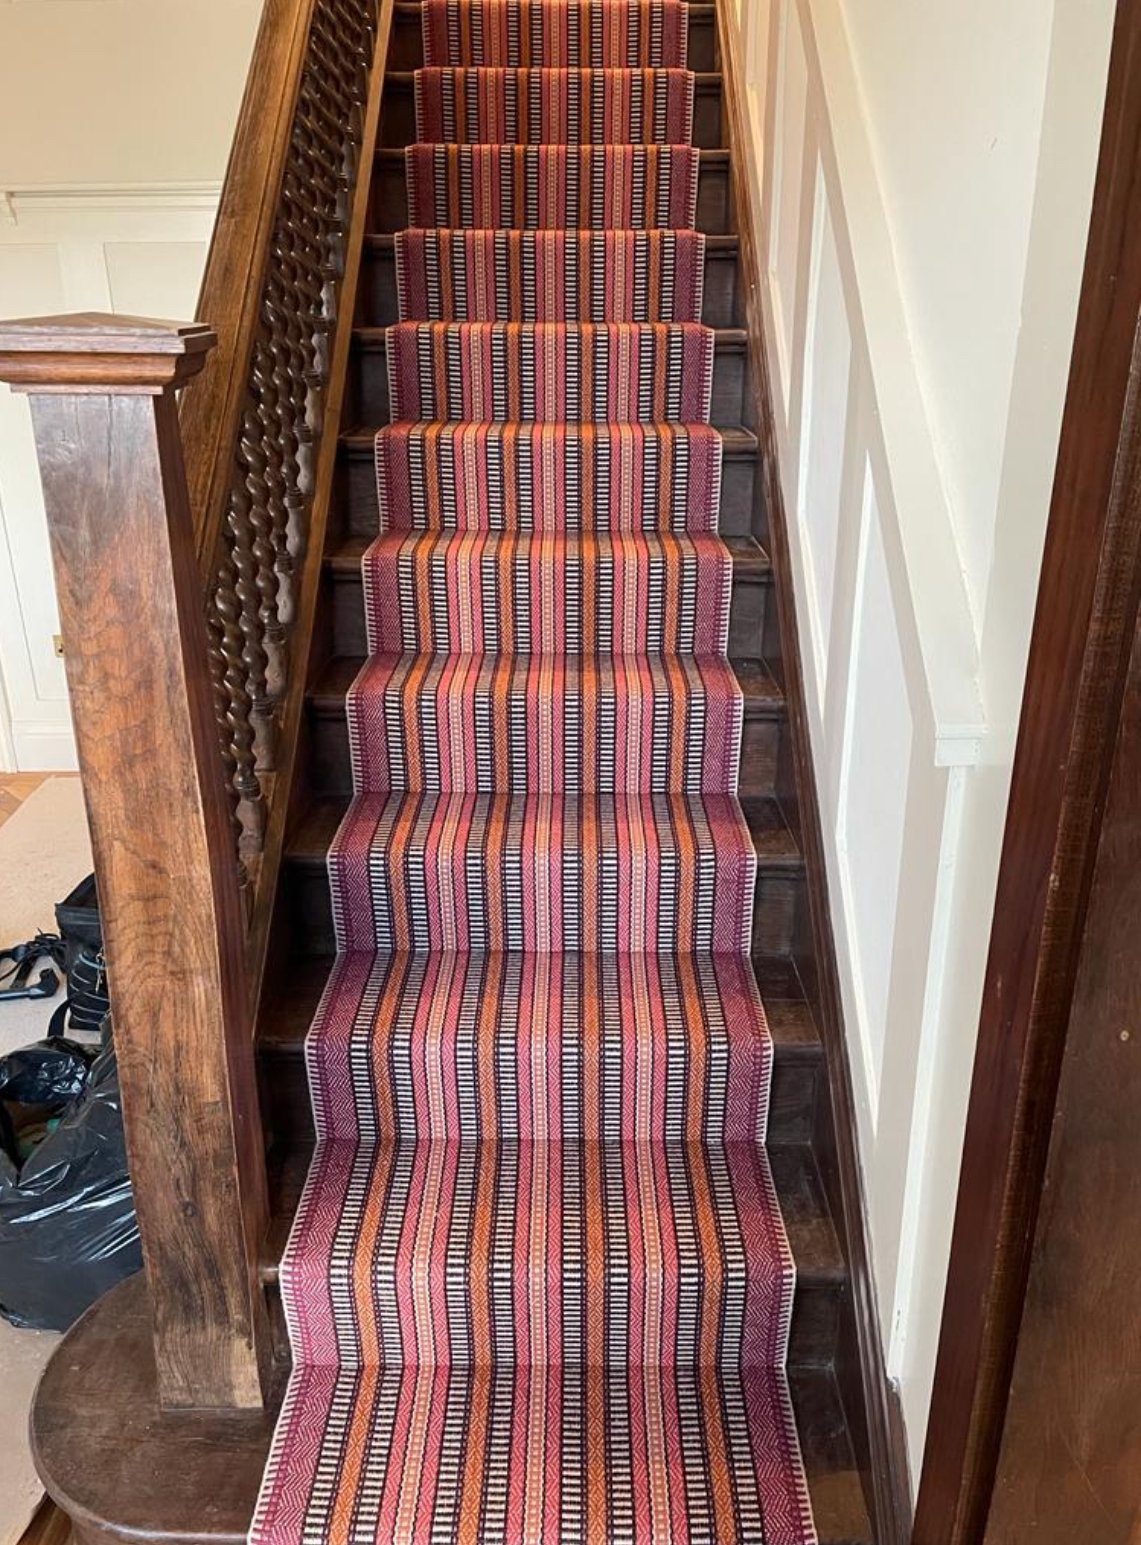 The striped runner on the main stairs